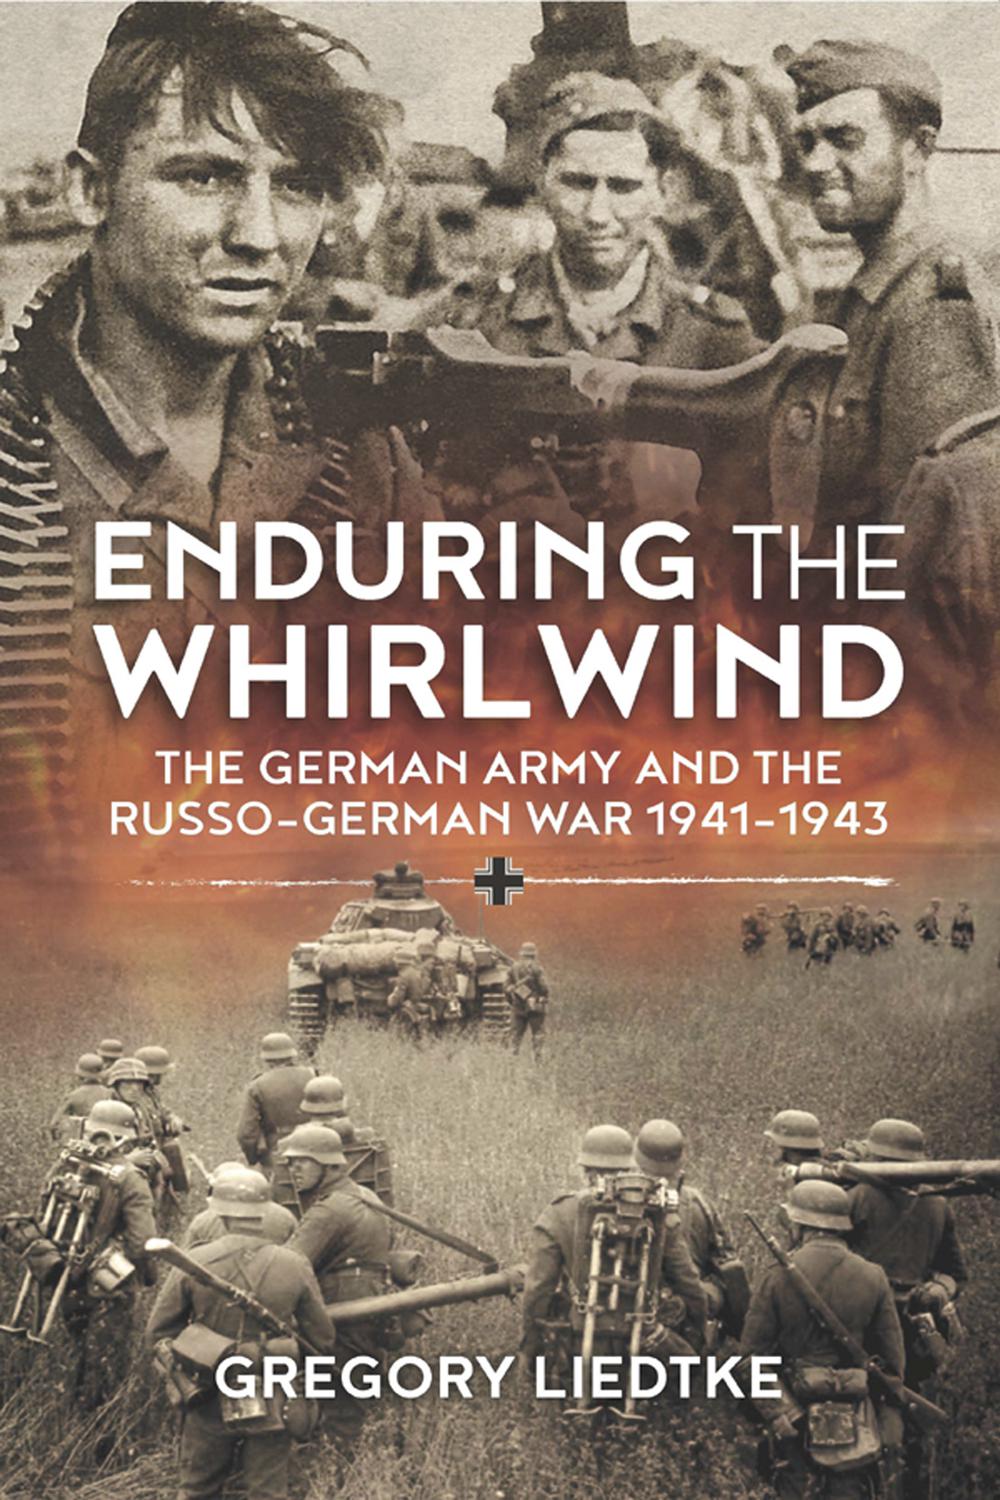 Enduring the Whirlwind - Gregory Liedtke